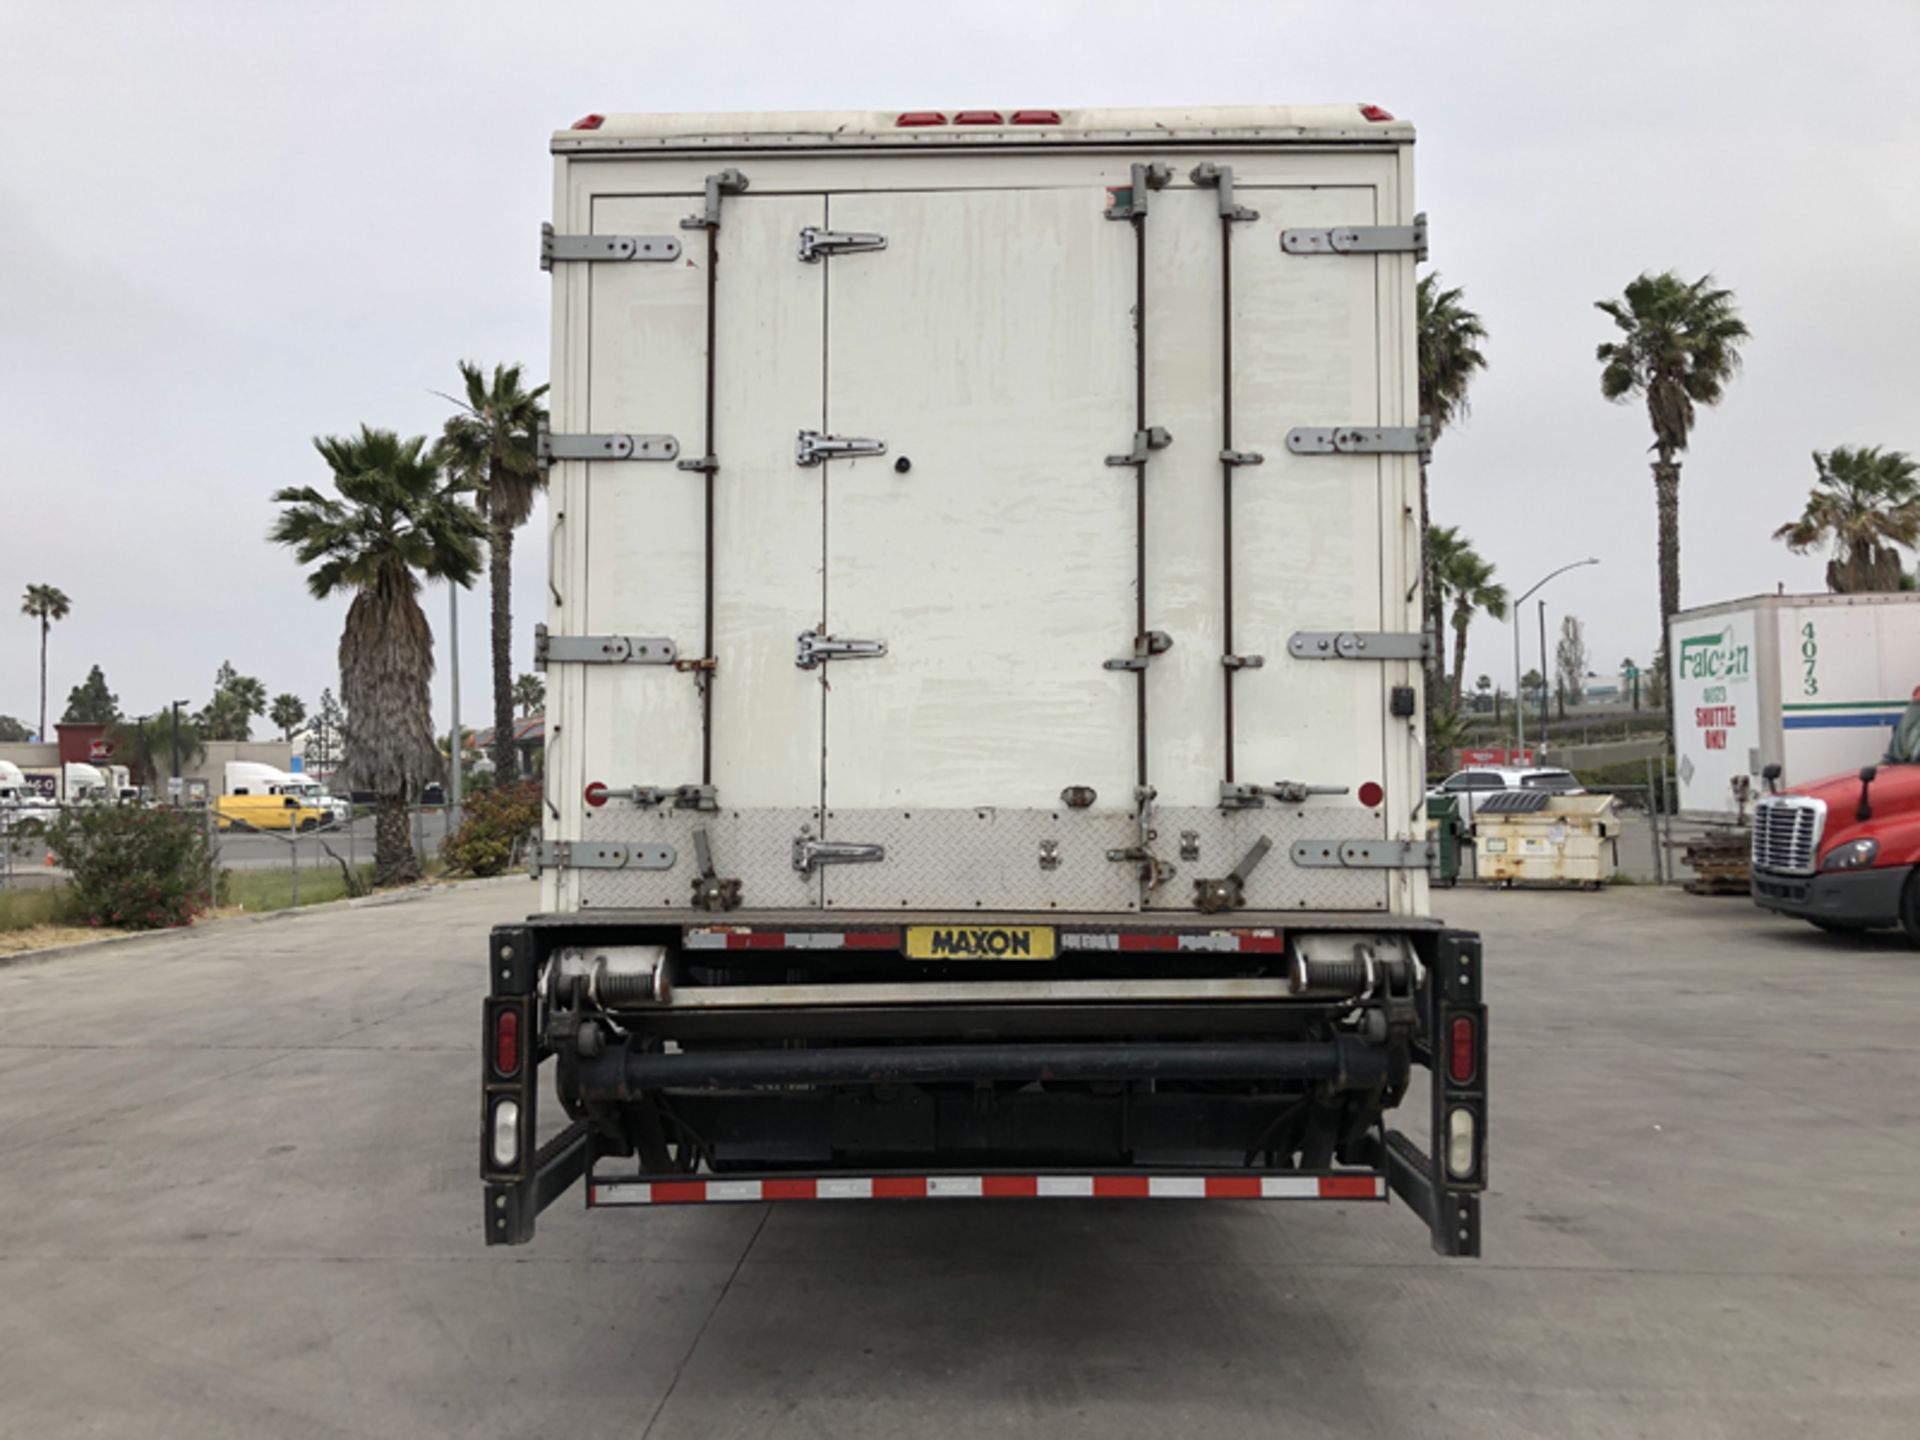 2018 INTERNATIONAL 4400 SBA 6X4 REFRIGERATED BOX TRUCK VIN#: 1HTMSTAR0JH529609, Approx Miles: 65133, - Image 5 of 10